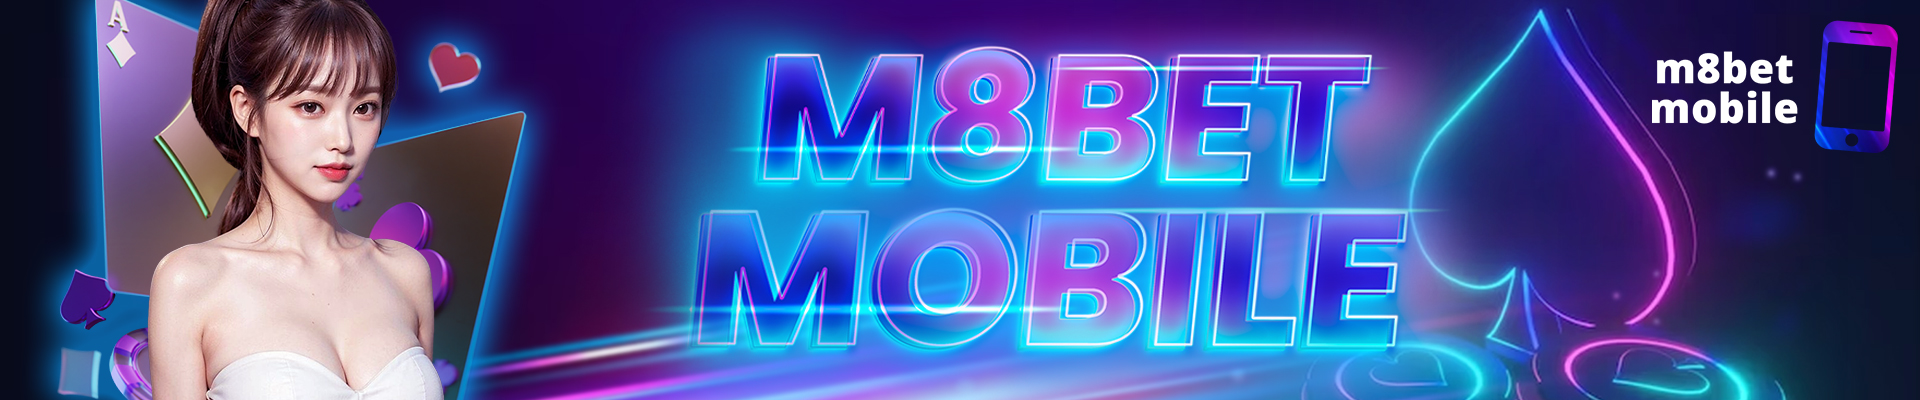 M8BET MOBILE